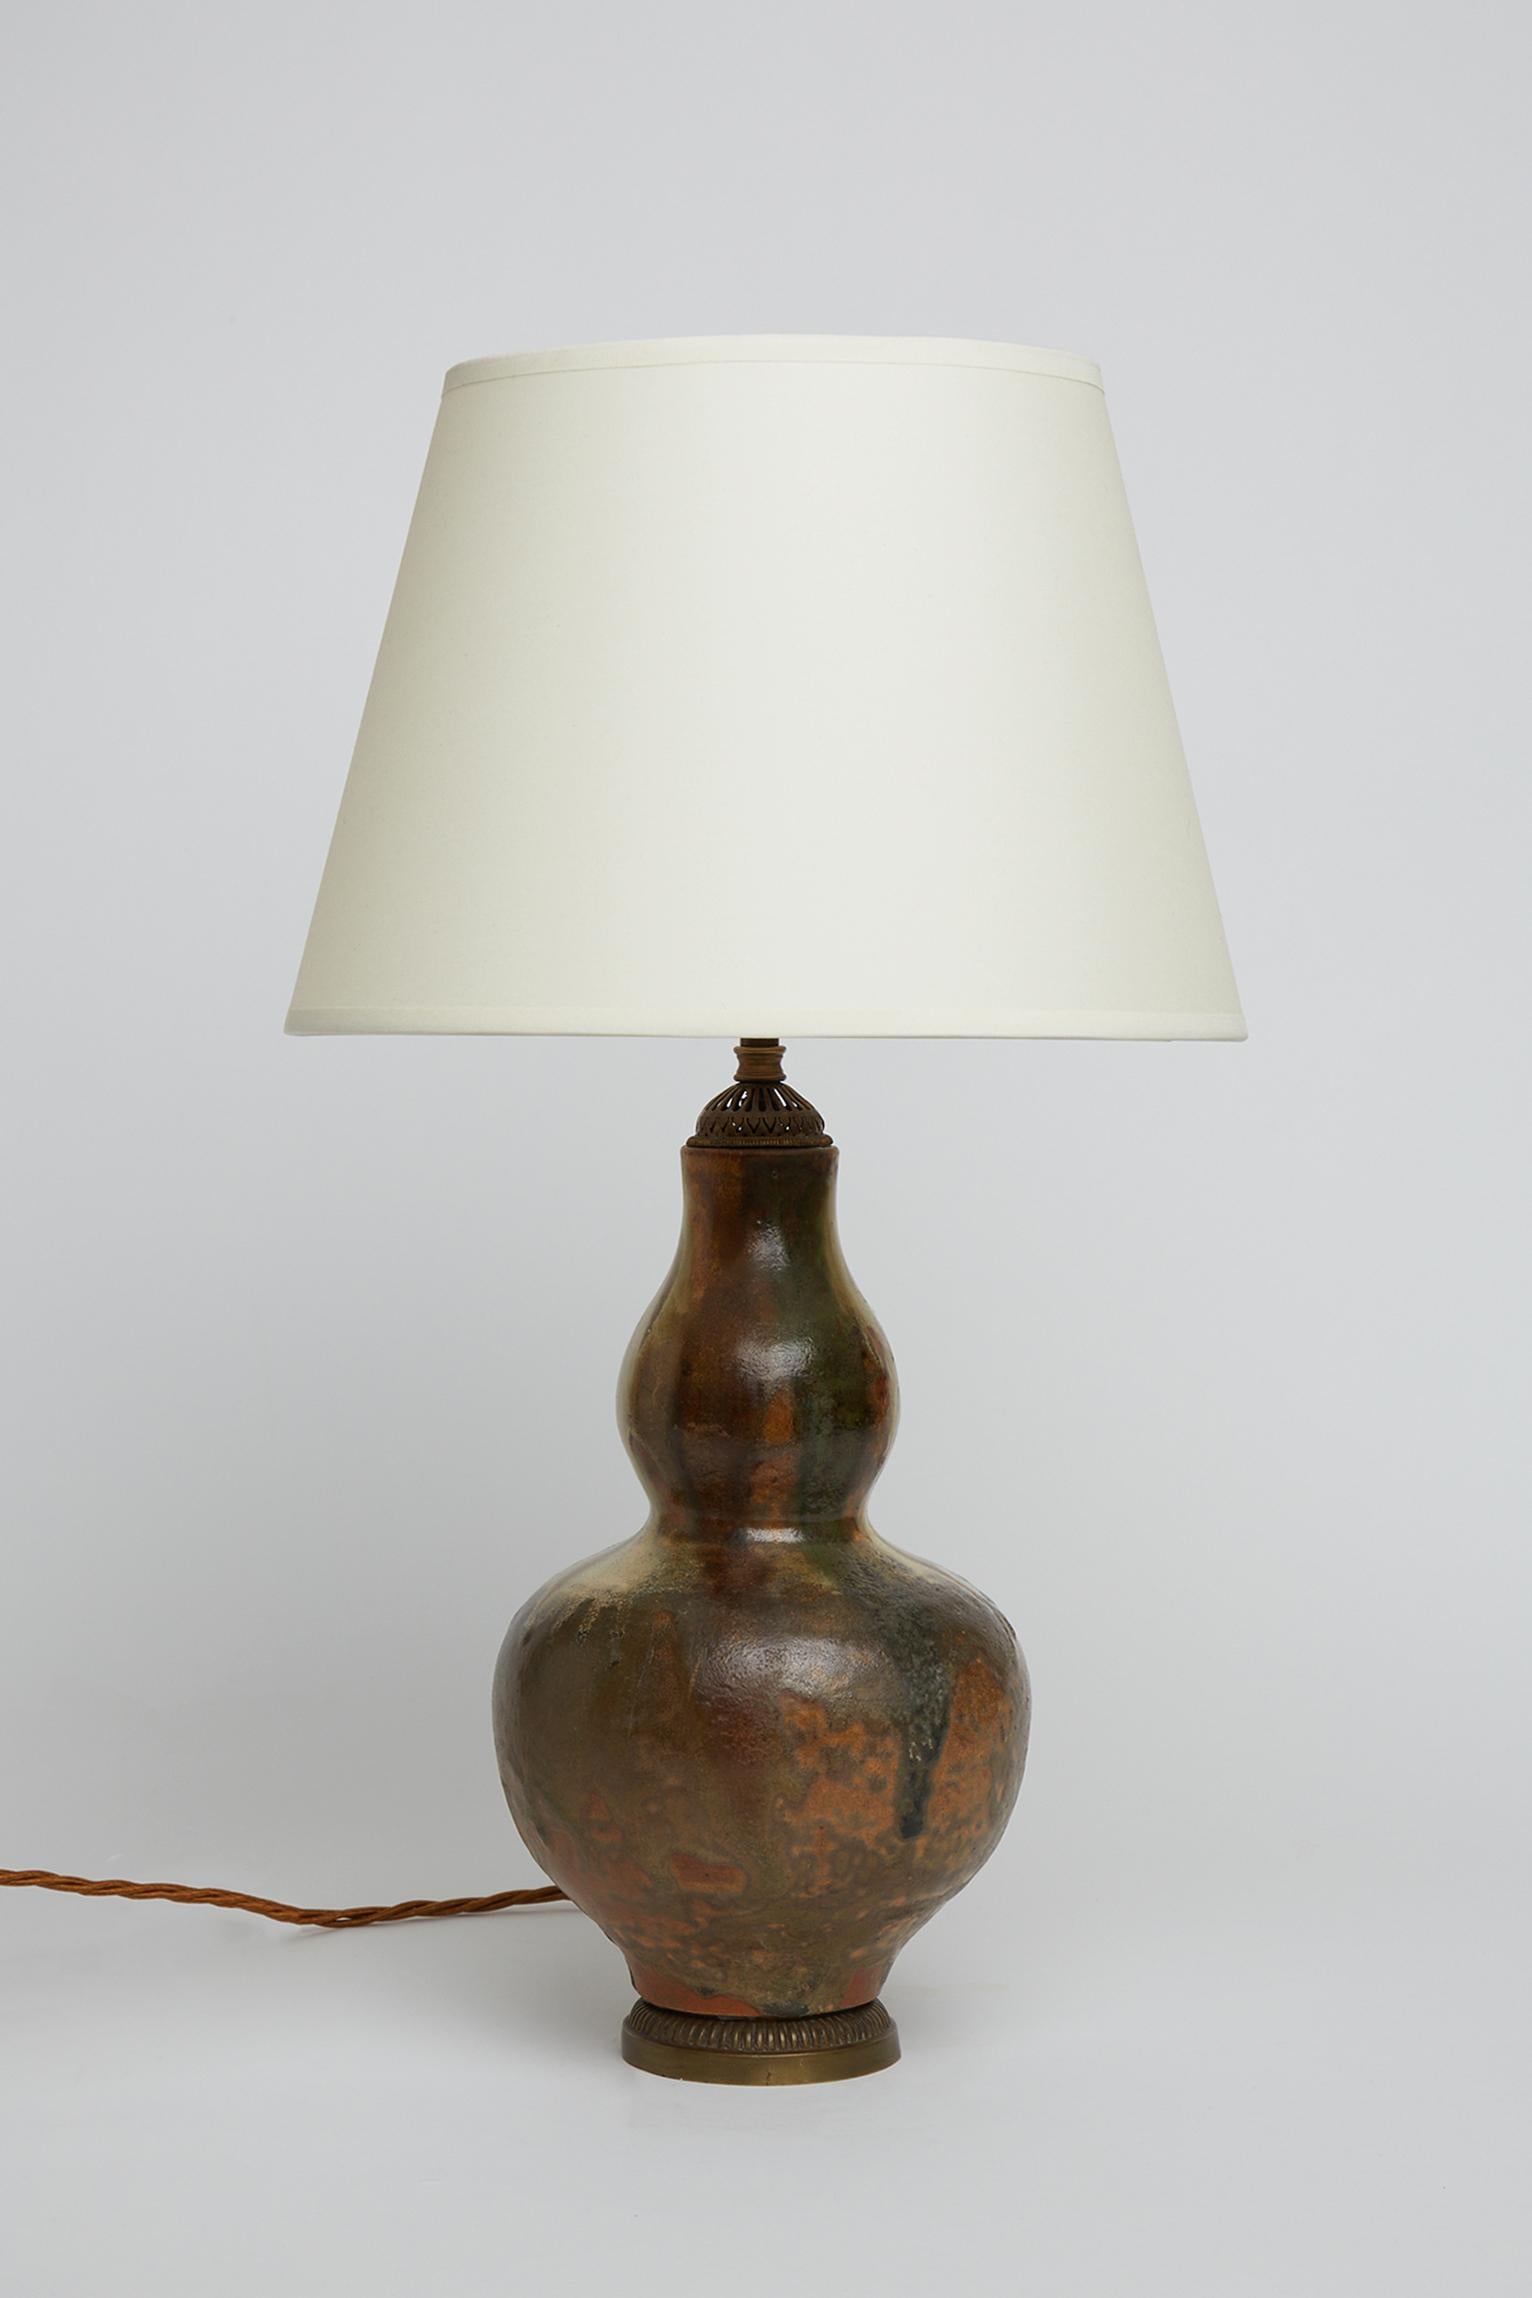 A mid-century table lamp, made of a stoneware double gourd shape ceramic vase with a polychrome glaze, mounted with 19th Century brass mounts.
France, Circa 1950.
Measures: with the shade: 58 cm high by 35 cm diameter.
Lamp base only: 41 cm high